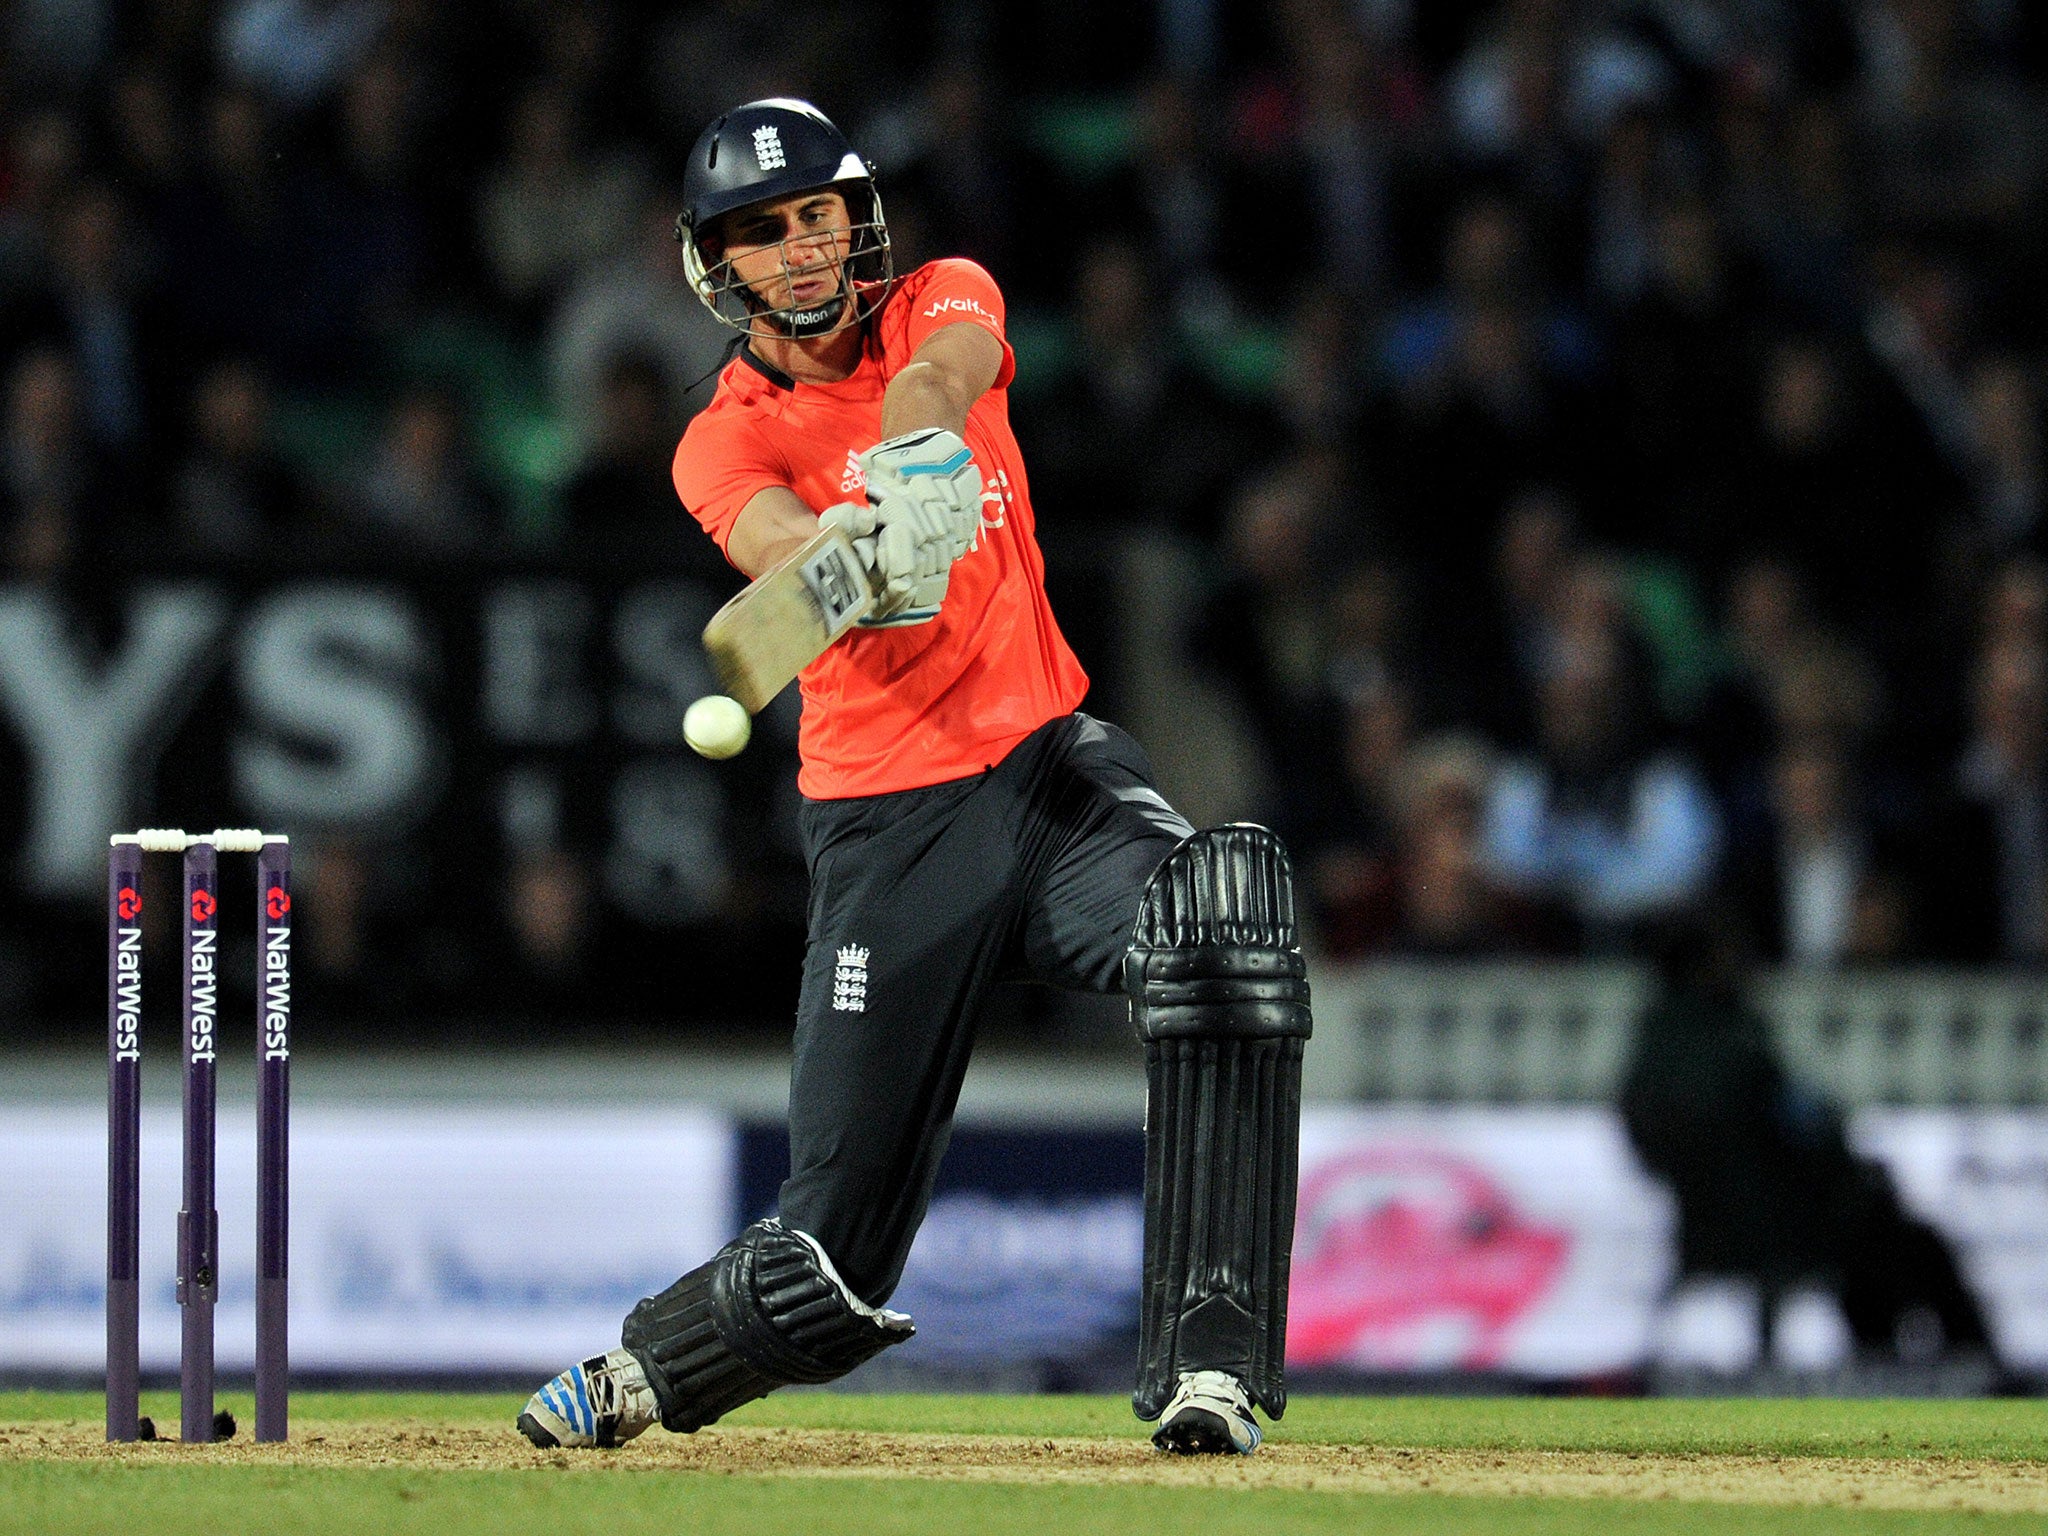 Alex Hales has agreed to join Hobart Hurricanes for the 2014-15 Big Bash League